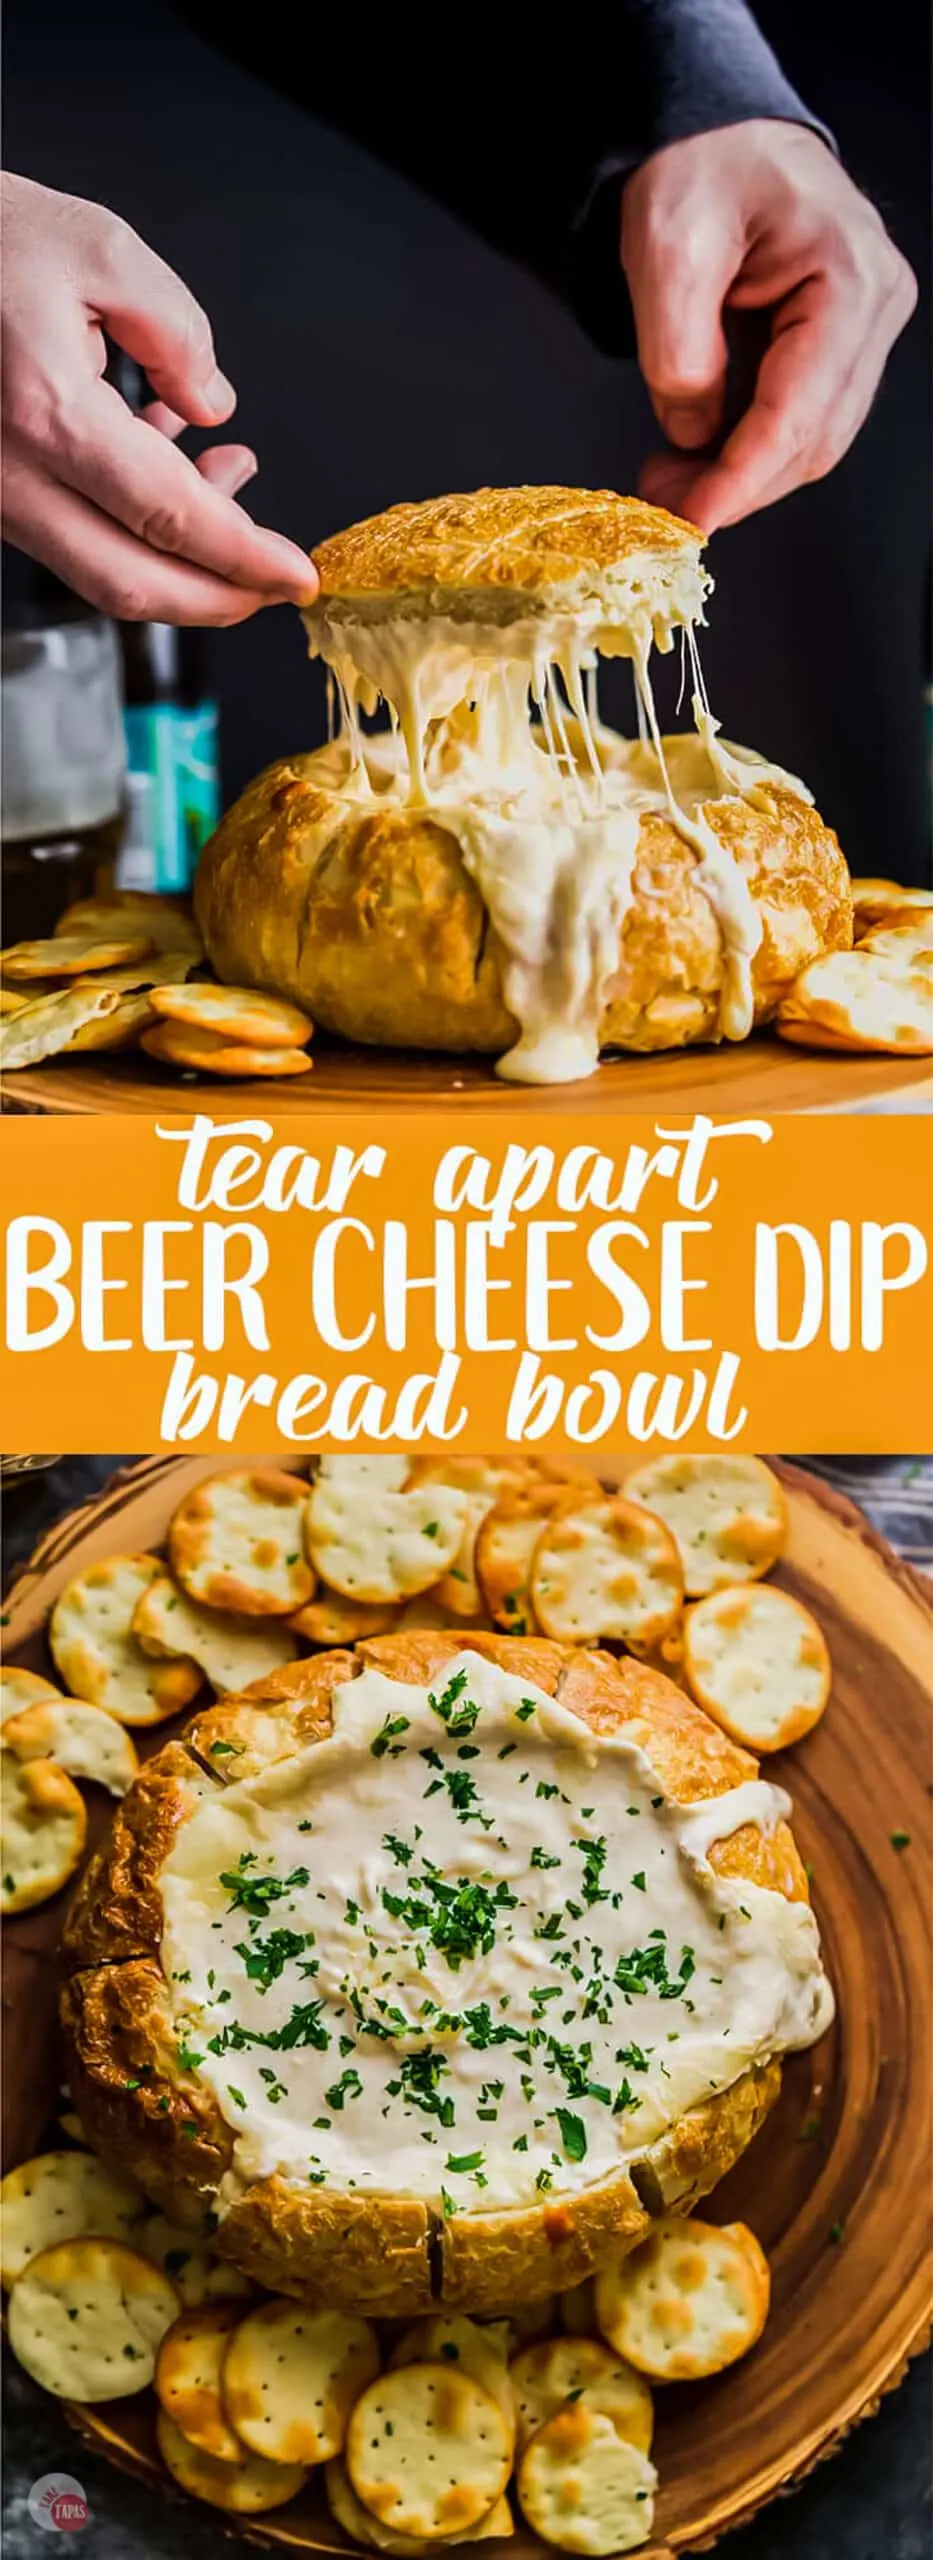 Creamy, Melty Beer Cheese dip in a tear apart bowl for easy serving. Ideal appetizer for any holiday appetizer or gameday party!